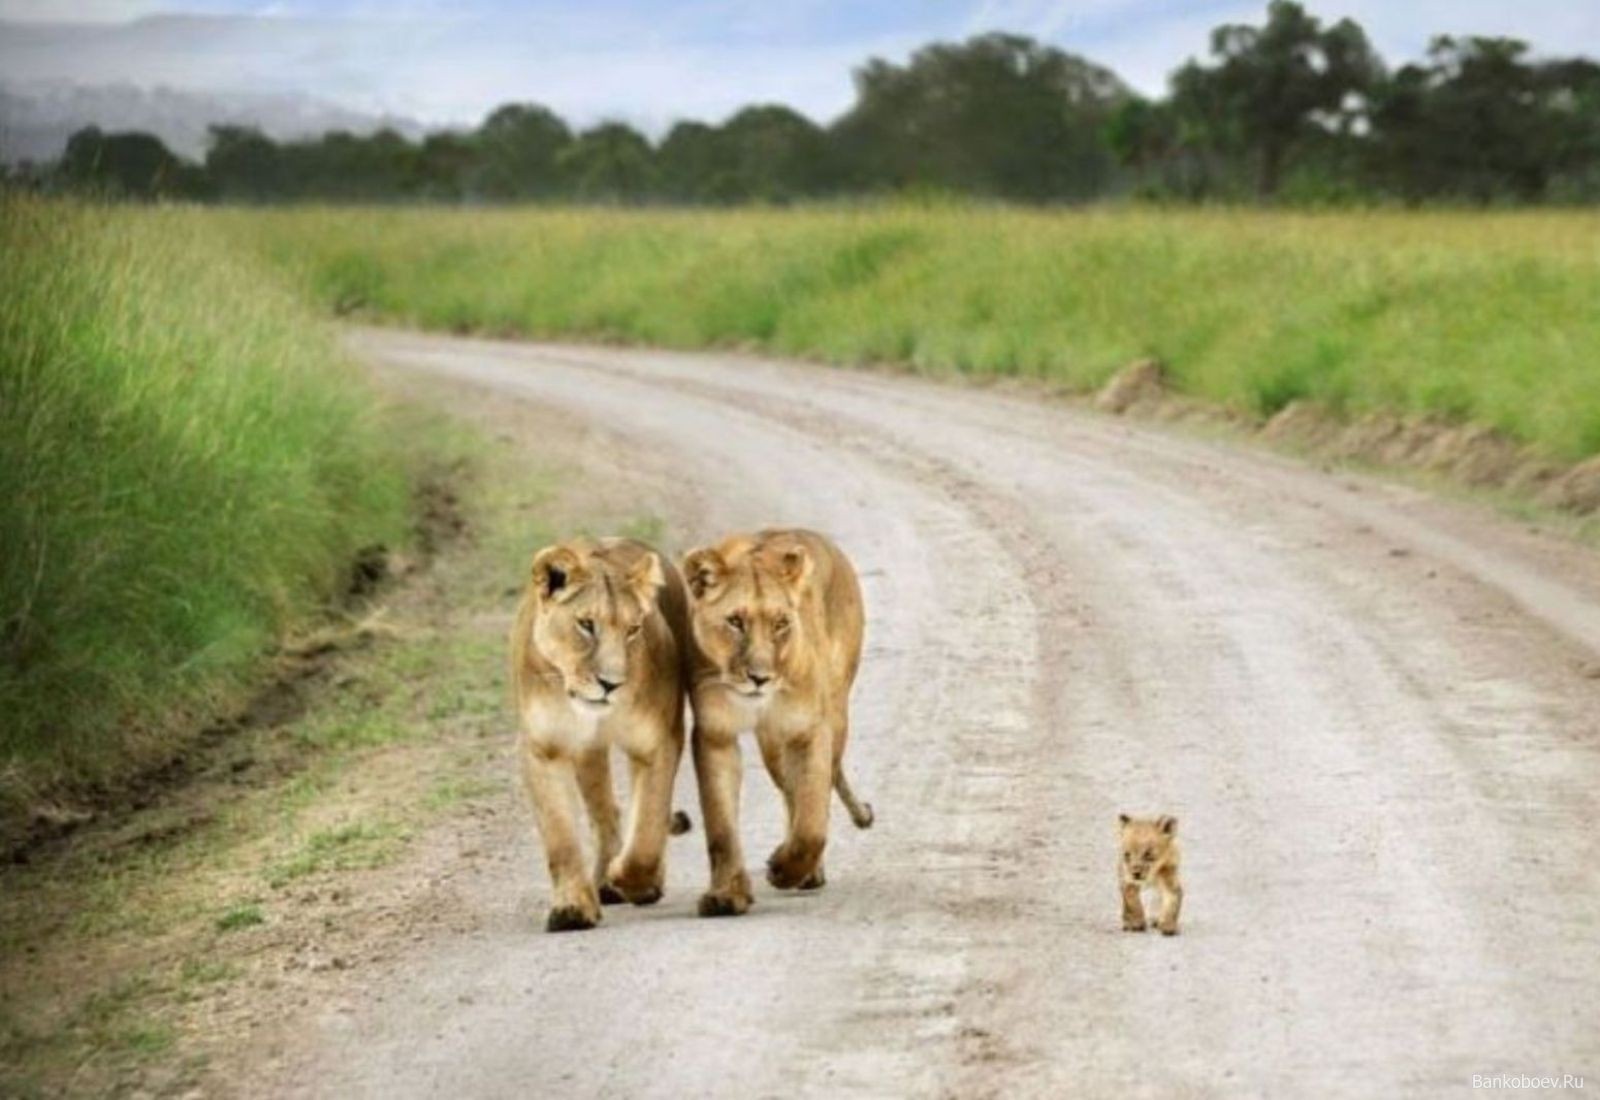 Cute Baby Wild Animals Wallpapers His Cute Baby Cub - HD Wallpaper 